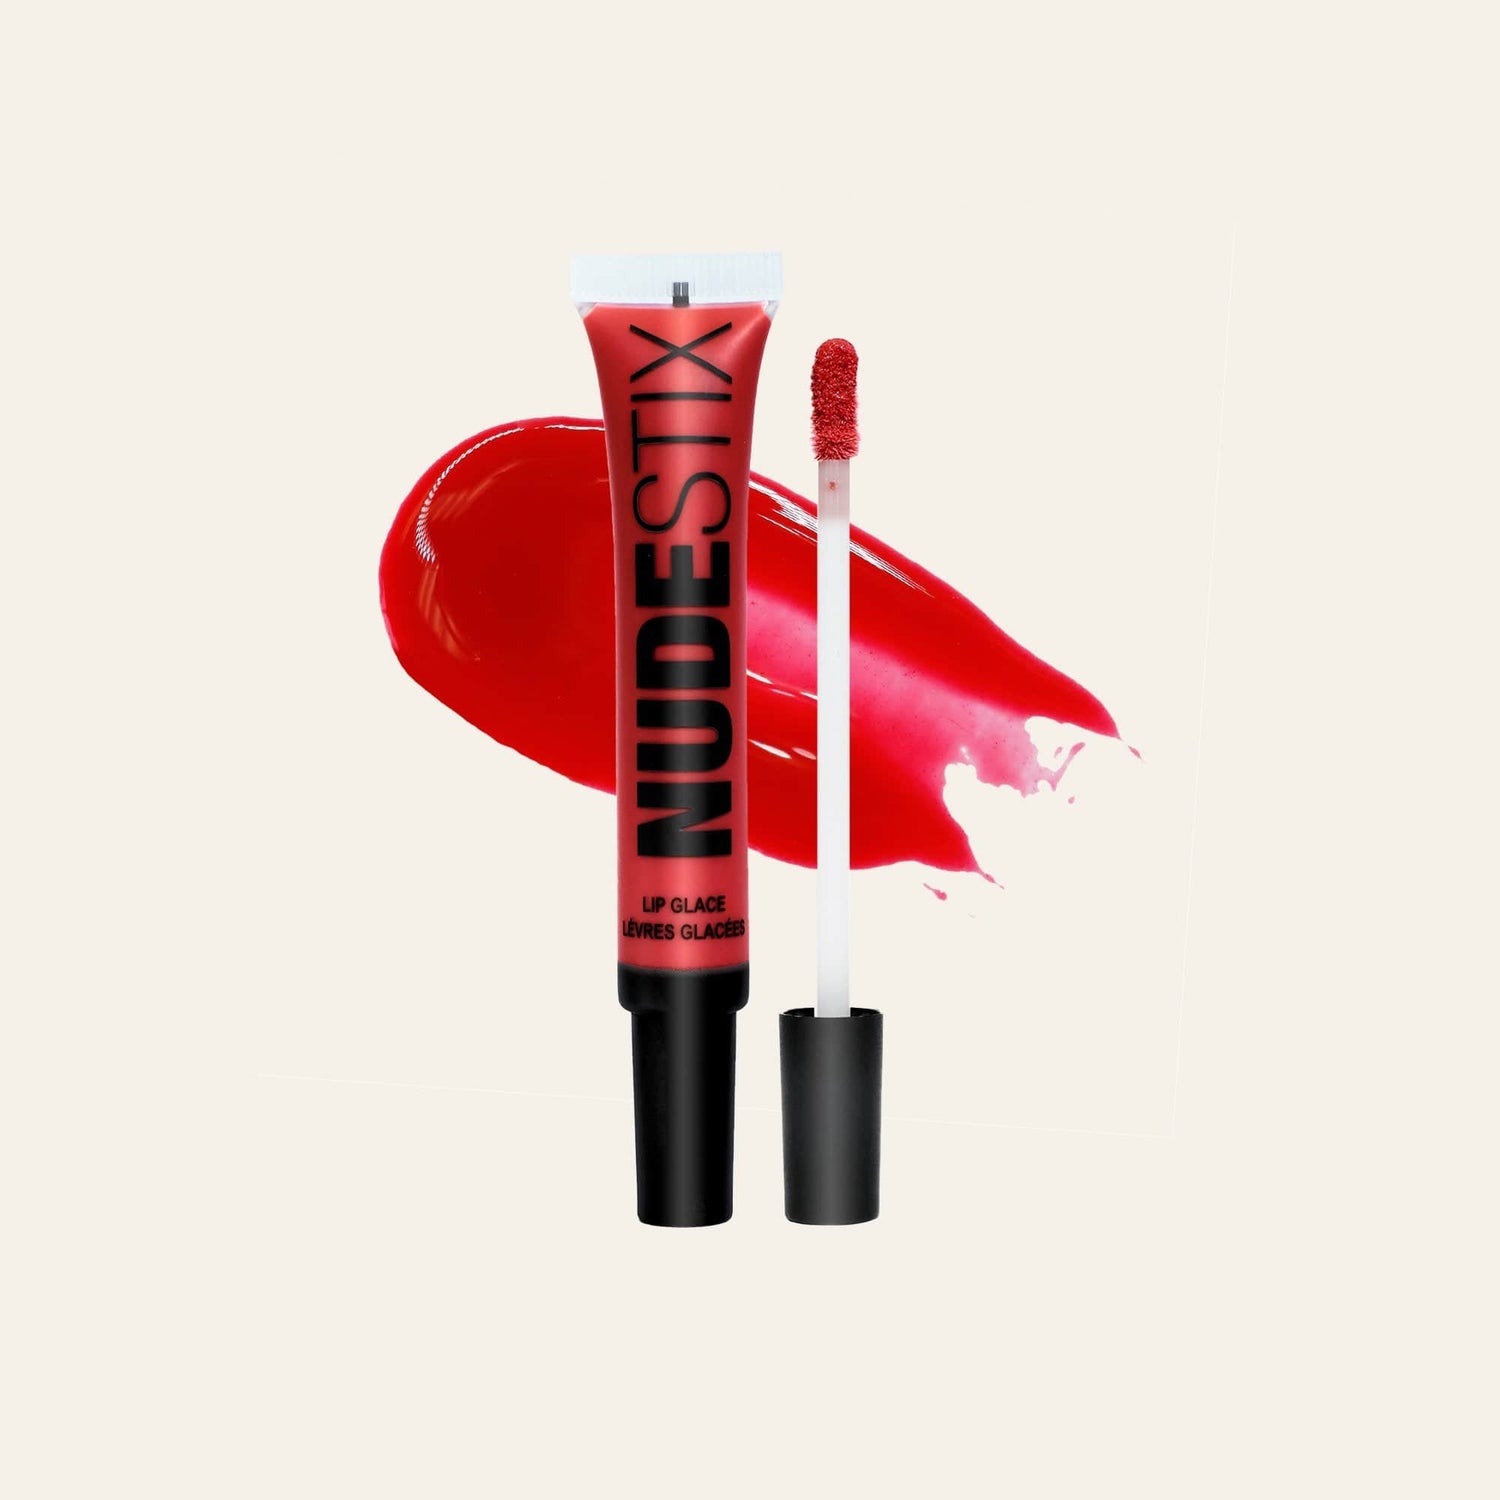 Lip Glace in shade Nude Cherry 00